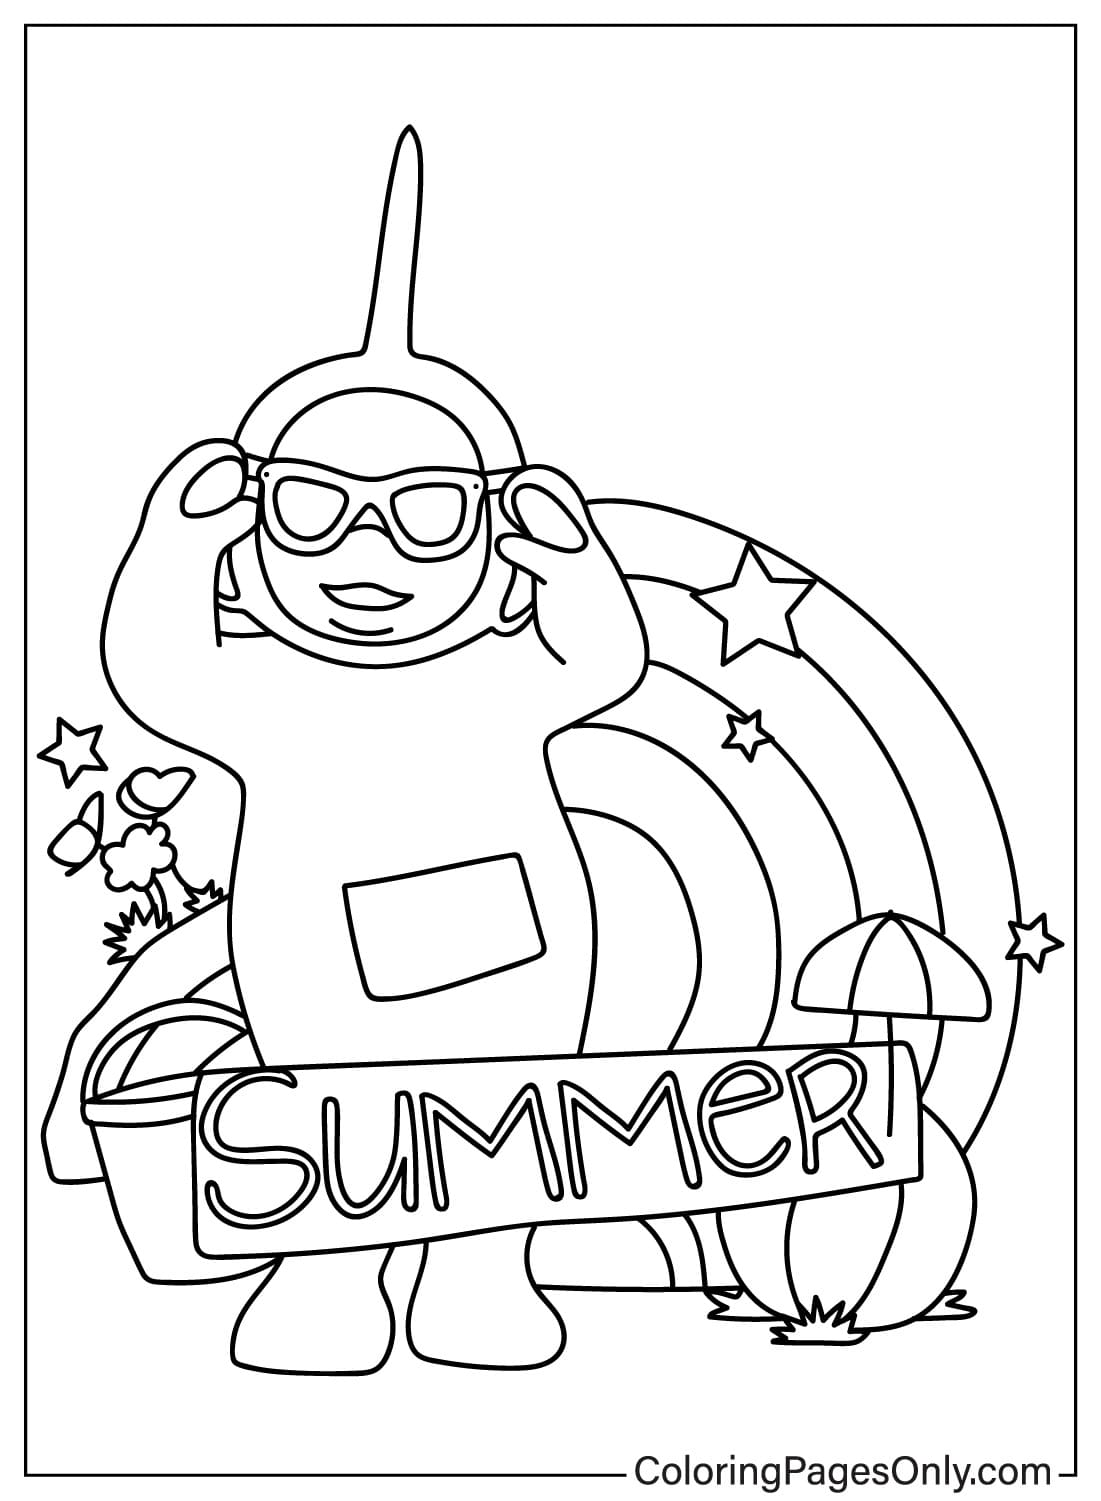 Dipsy Coloring Page Free from Teletubbies - WildBrain